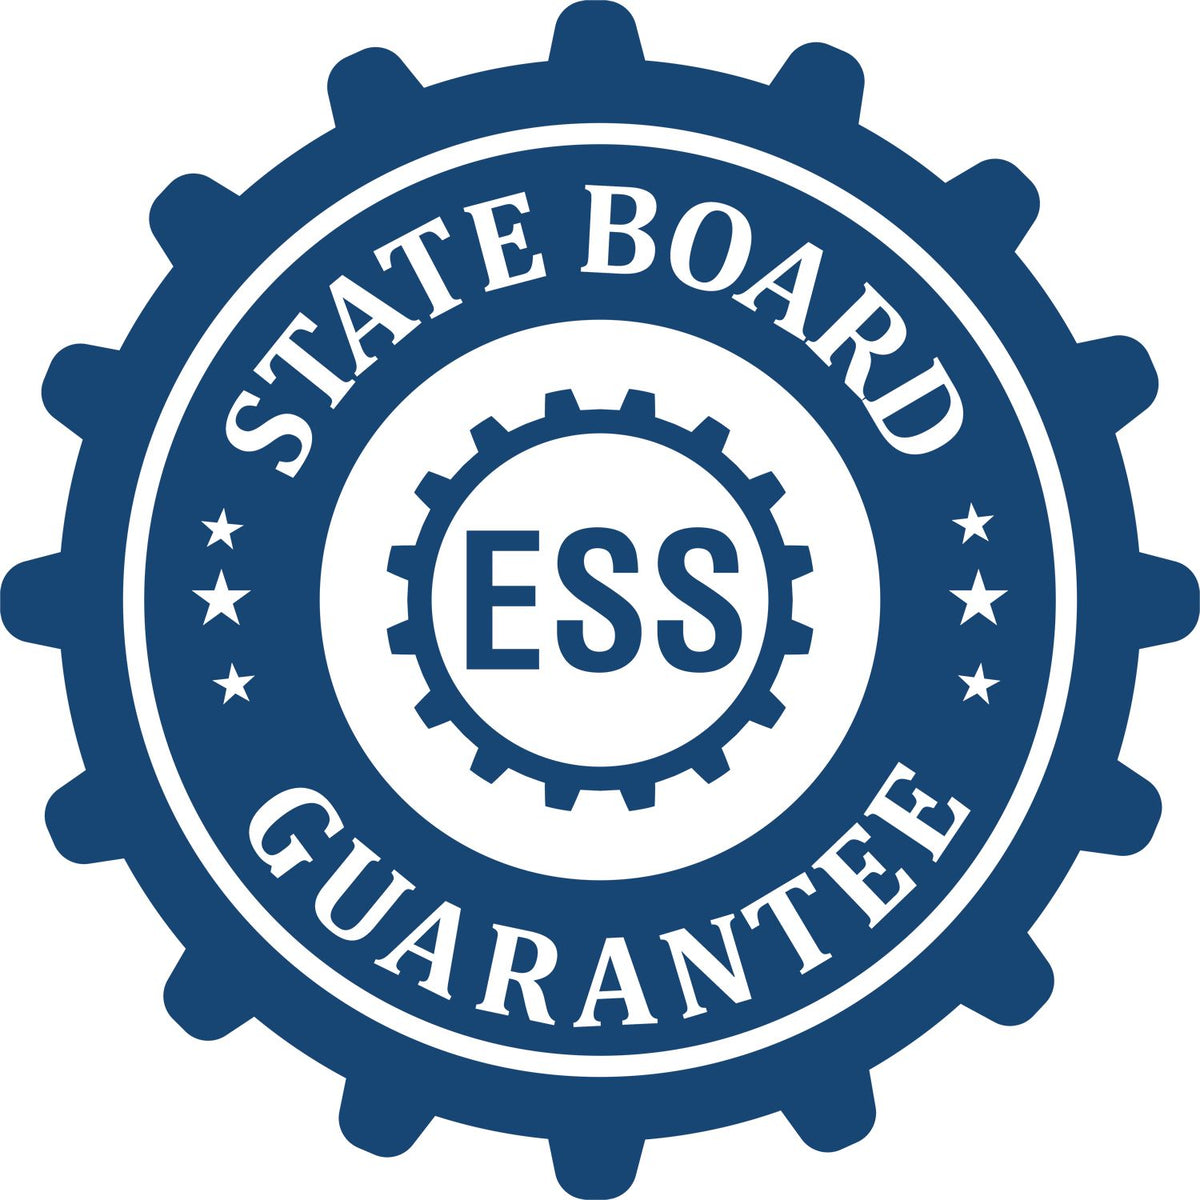 An emblem in a gear shape illustrating a state board guarantee for the Soft Connecticut Professional Engineer Seal product.